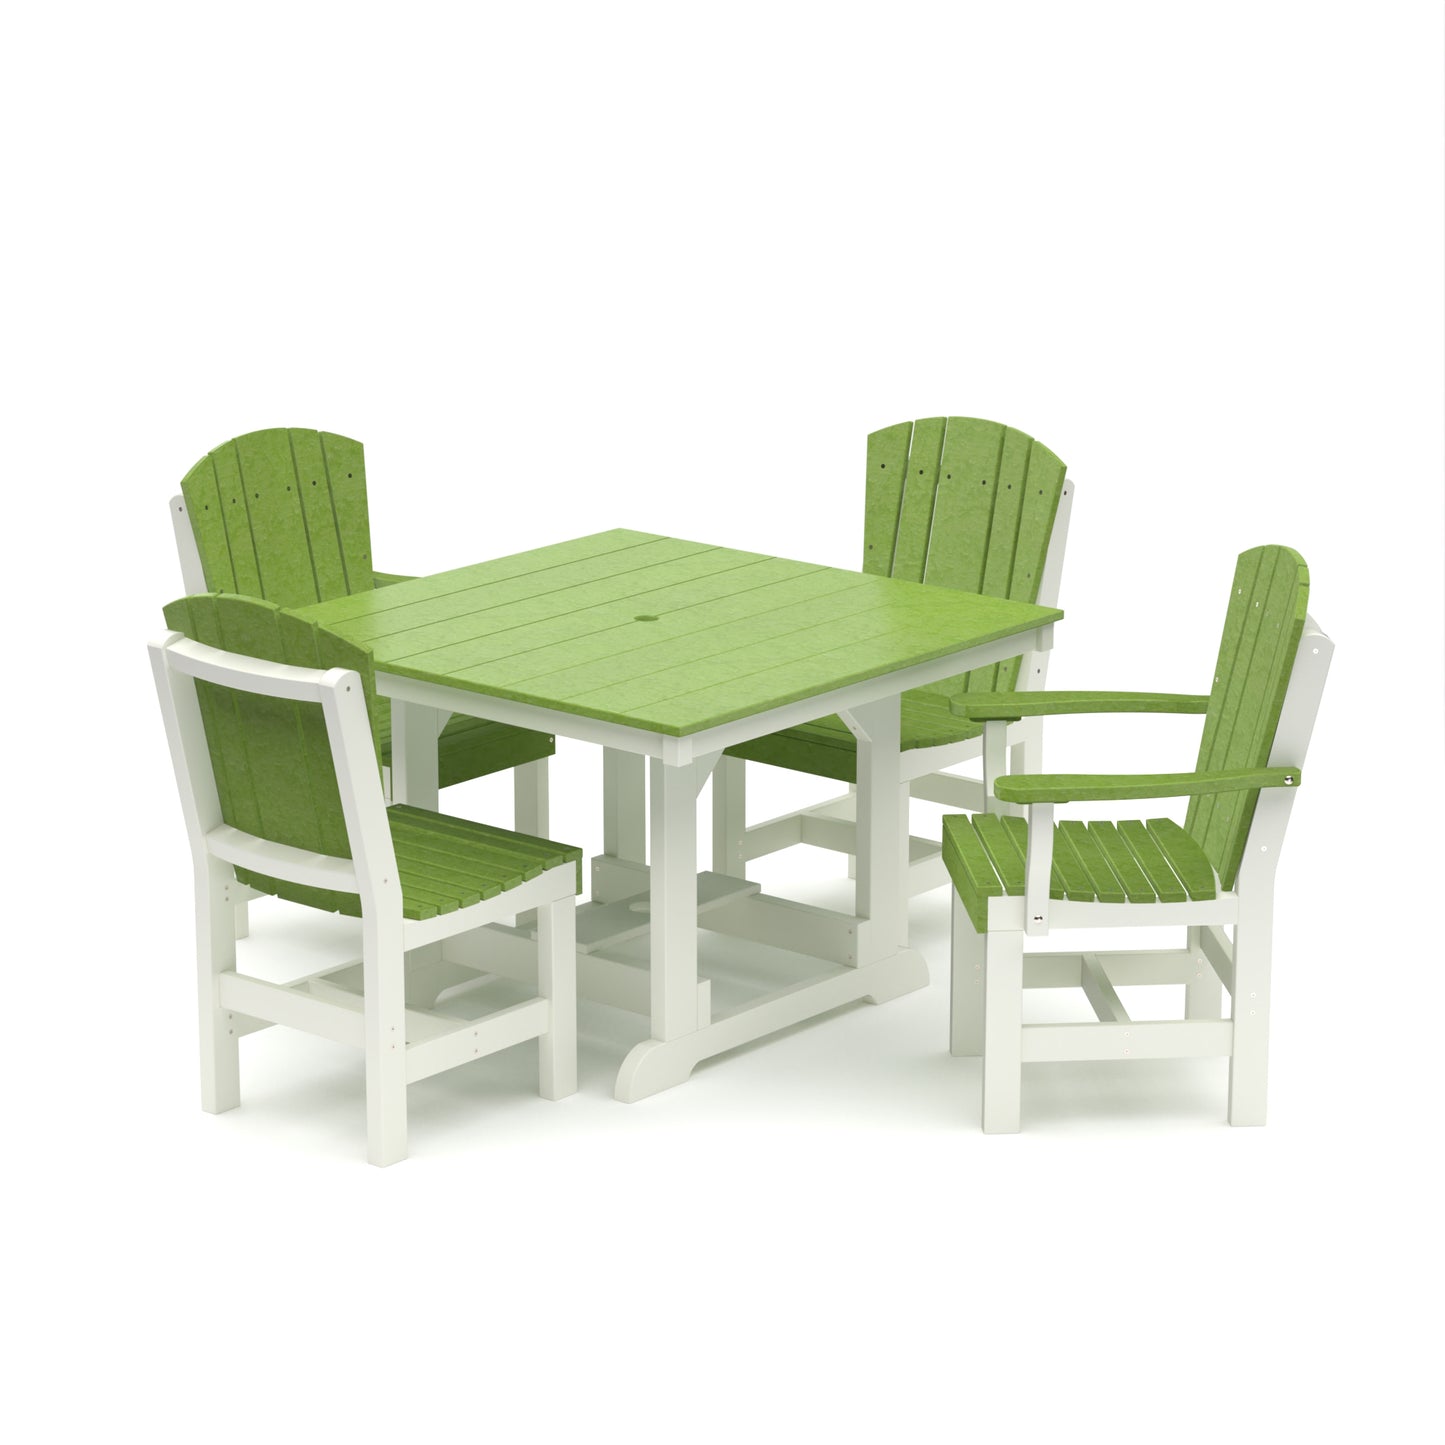 Wildridge Heritage Recycled Plastic 44x44 Table Set with 4 Dining Chairs - LEAD TIME TO SHIP 6 WEEKS OR LESS